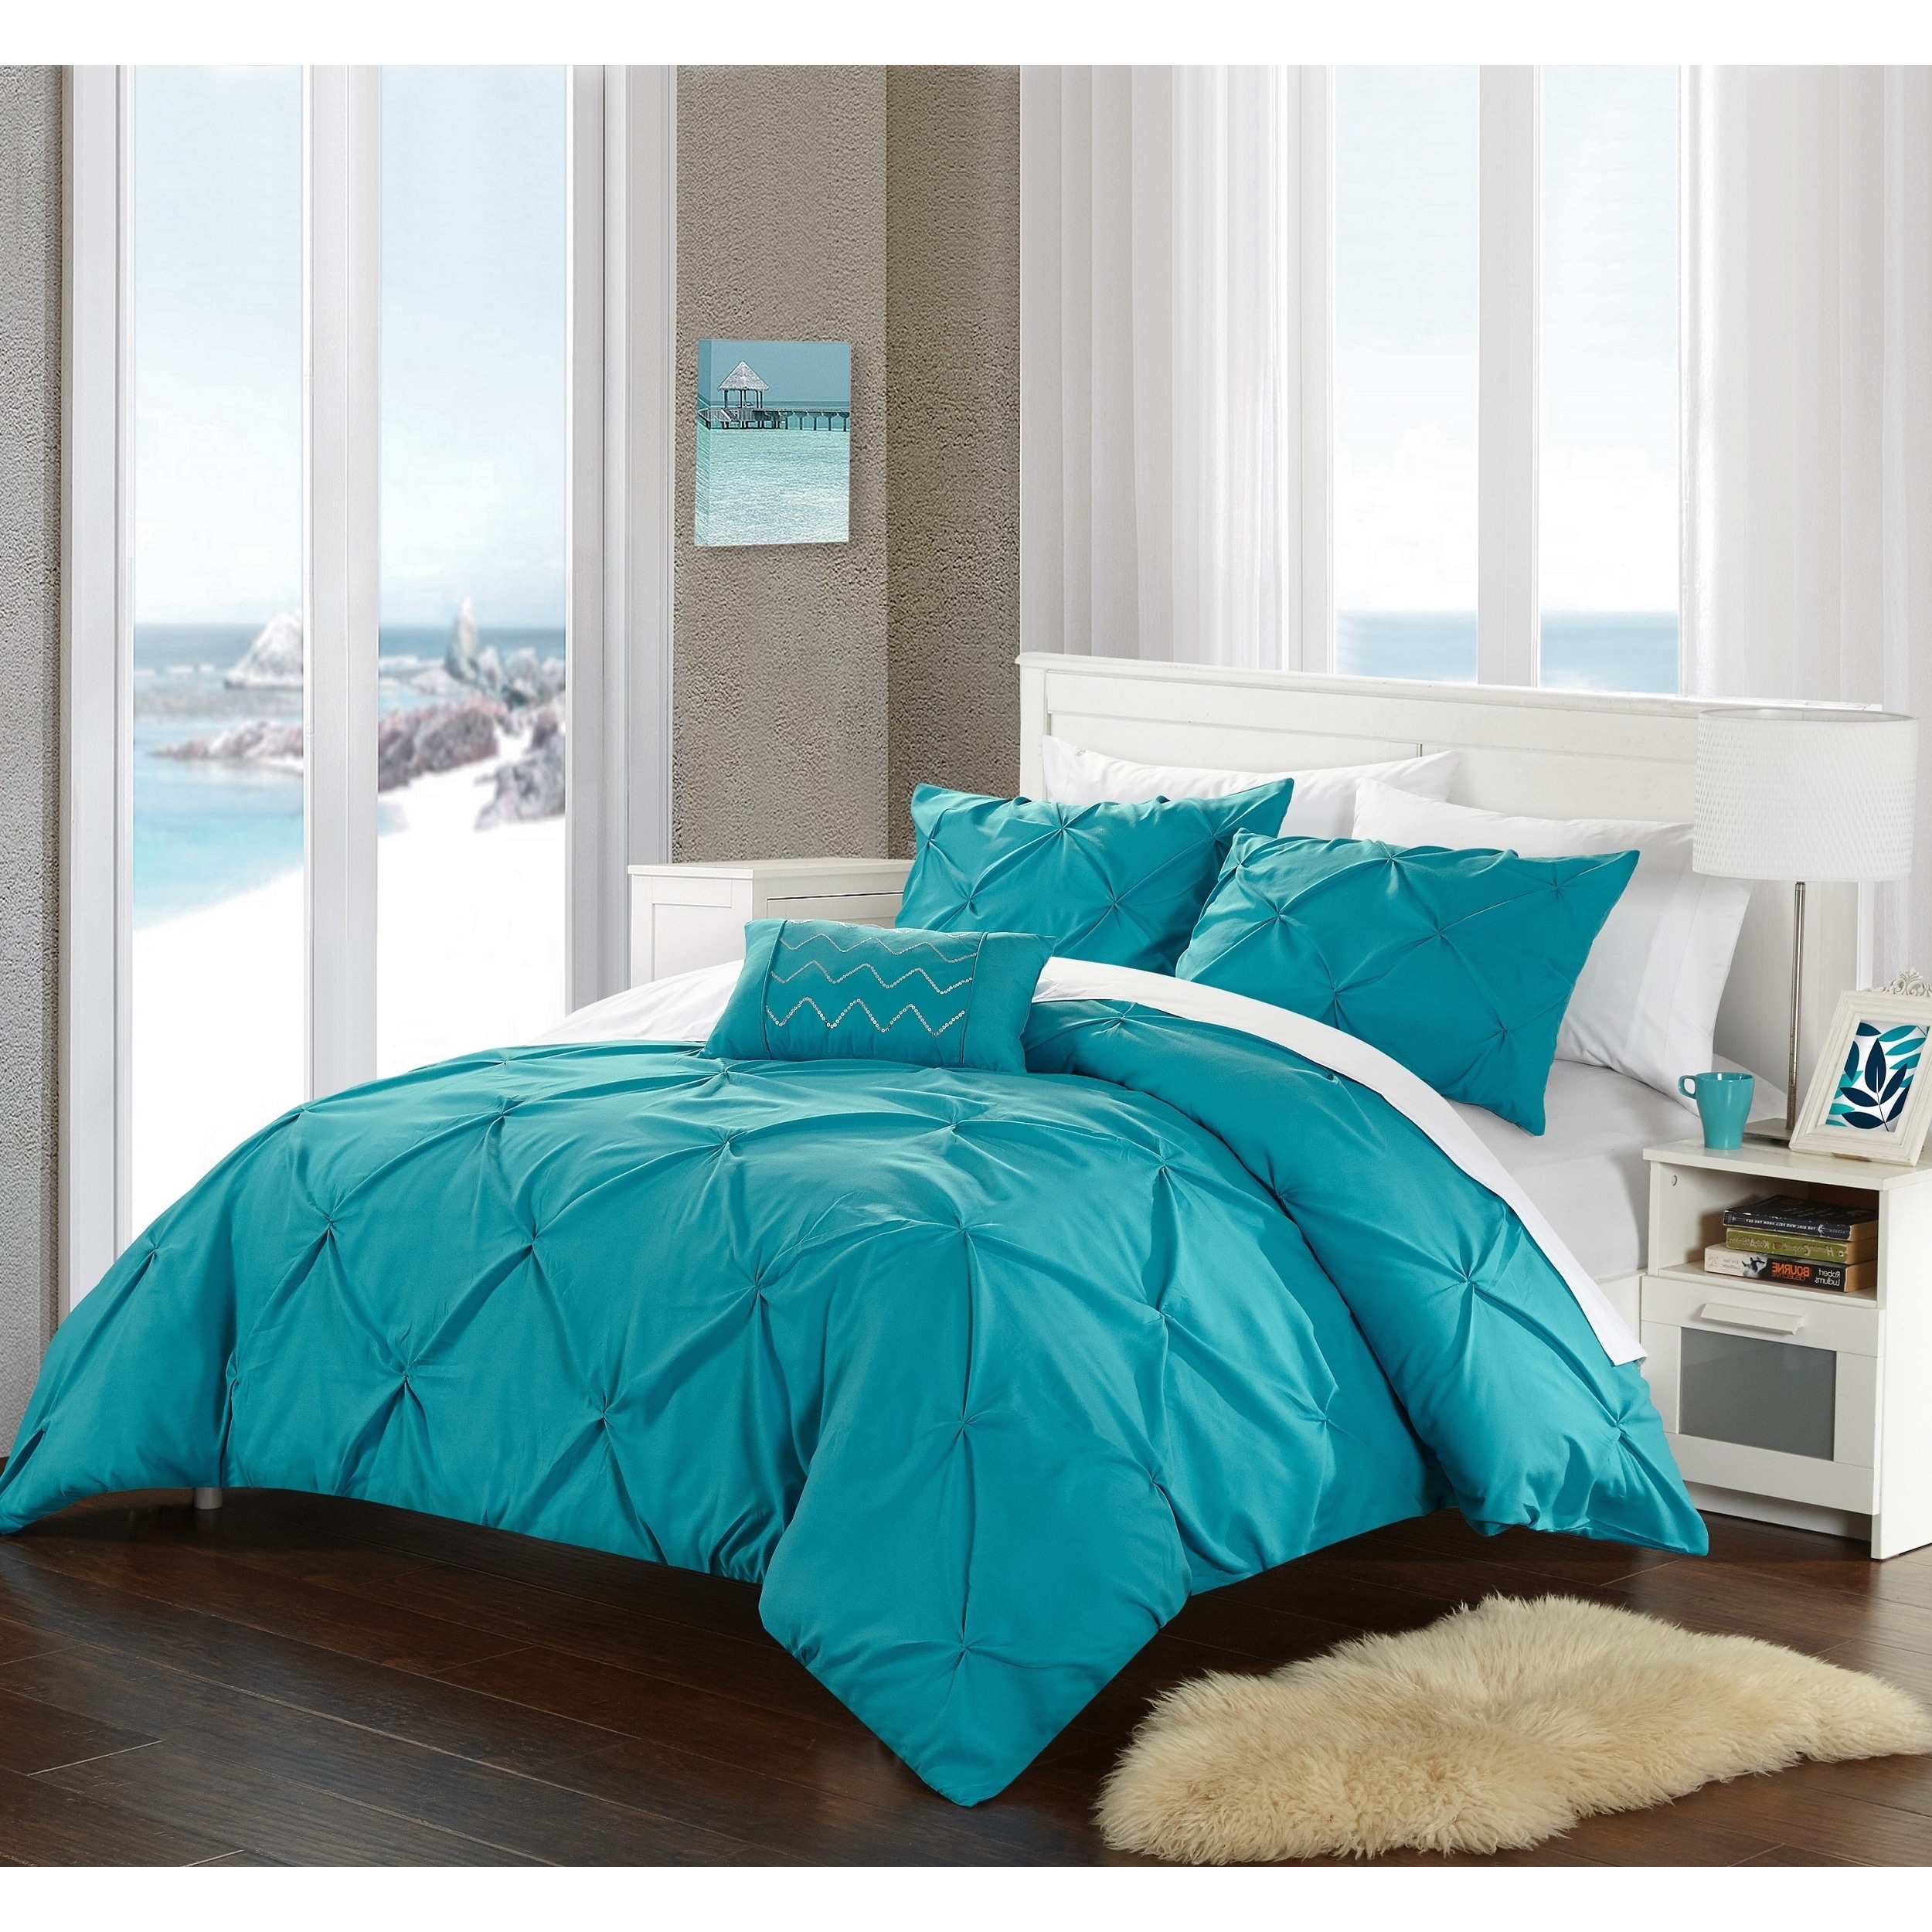 Shop Chic Home Whitley Turquoise 8 Piece Bed In A Bag Duvet Cover